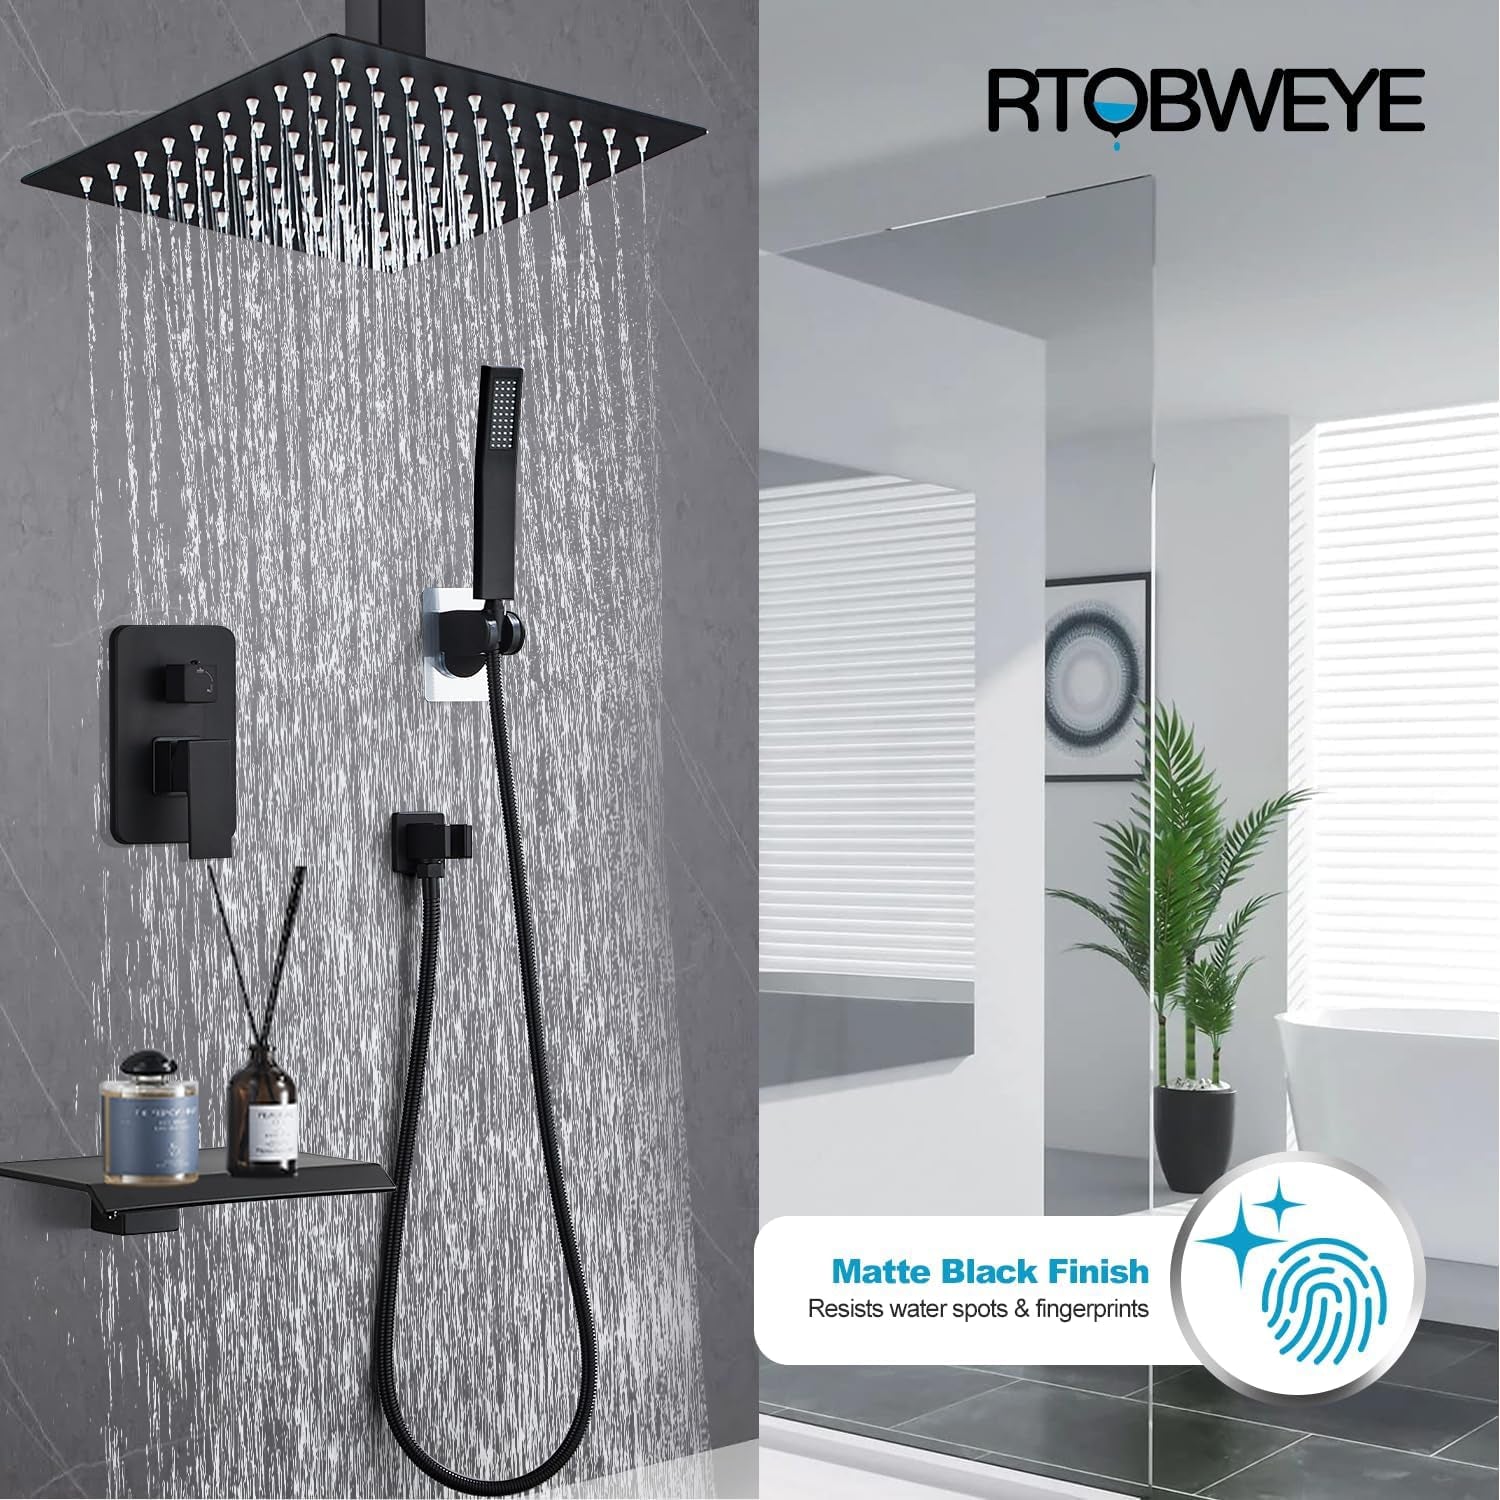 8 Inch Shower Faucet Set, Rainfall Shower System with High Pressure Handheld Shower Head, Bathroom Mixer Shower Set Ceiling Mounted Rough-In Valve and Trim Kit, Matte Black, with Tub Spout